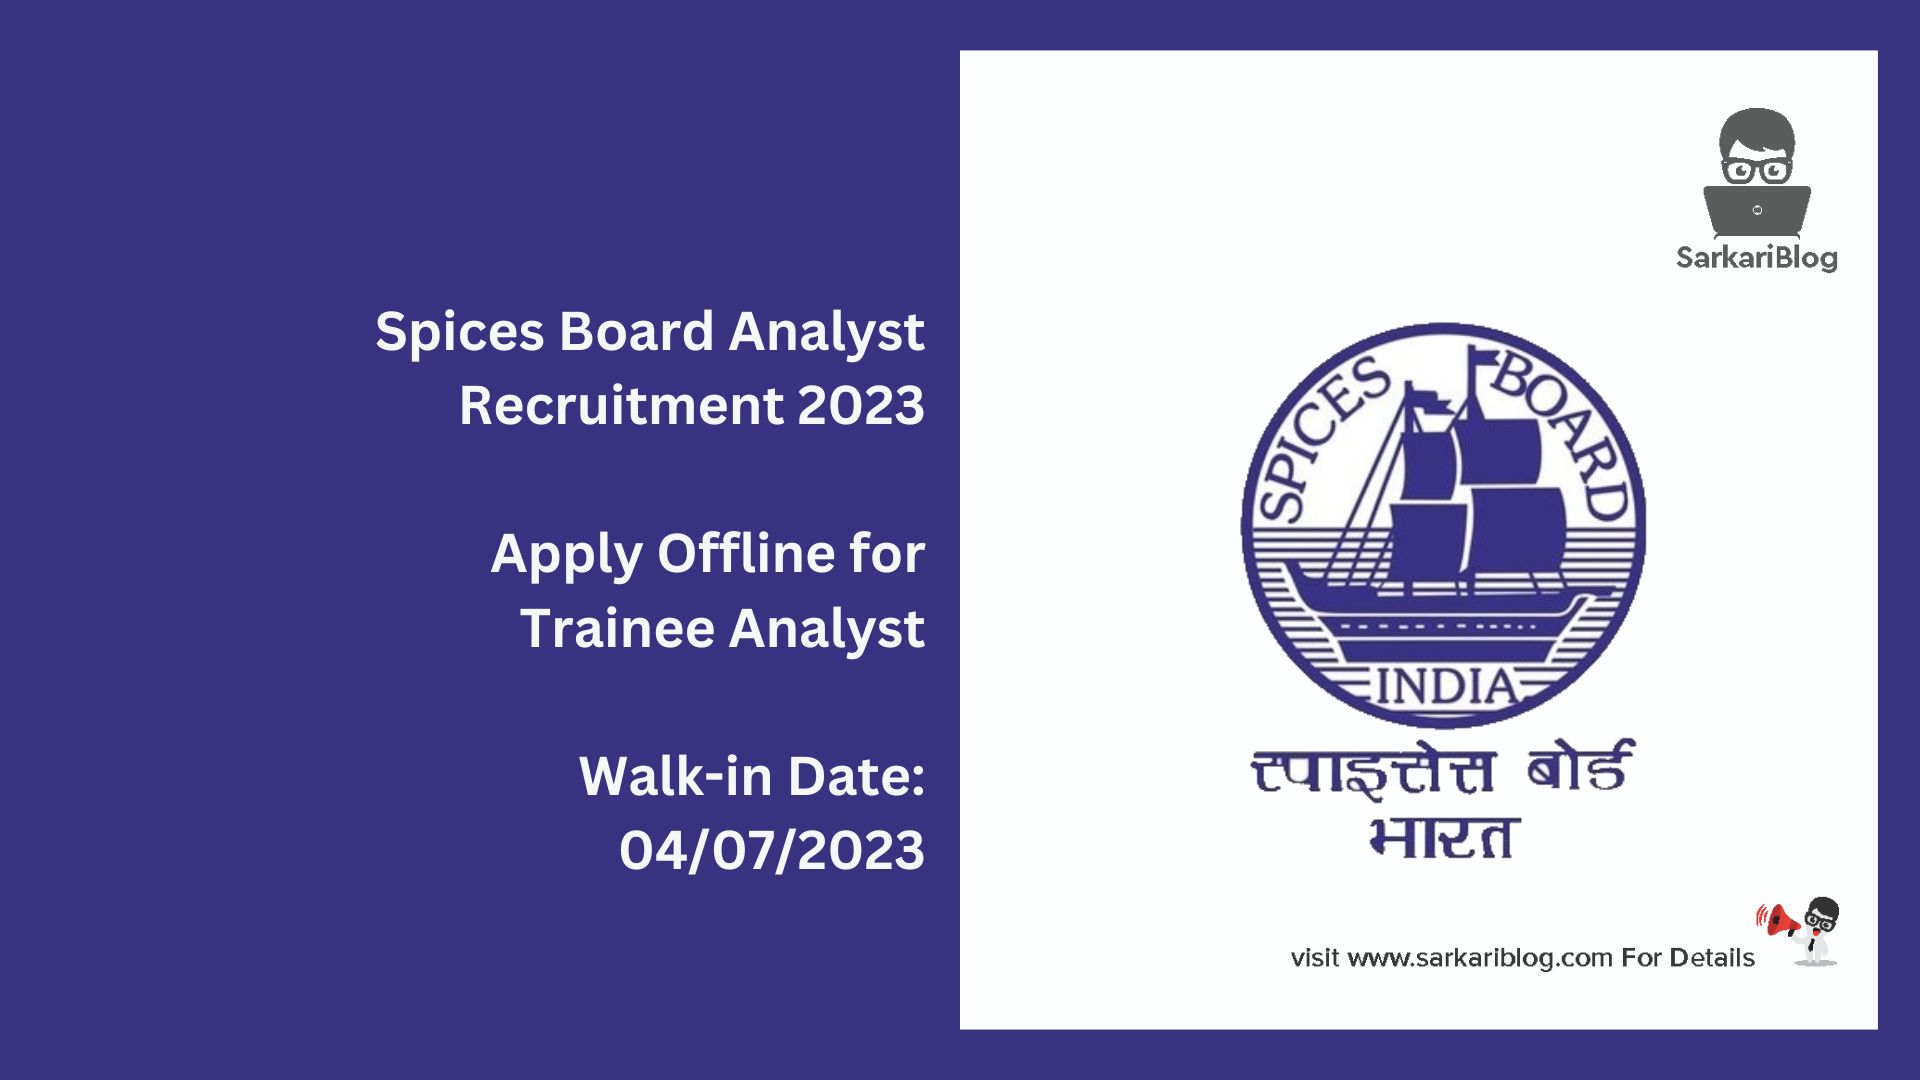 Spices Board Analyst Recruitment 2023